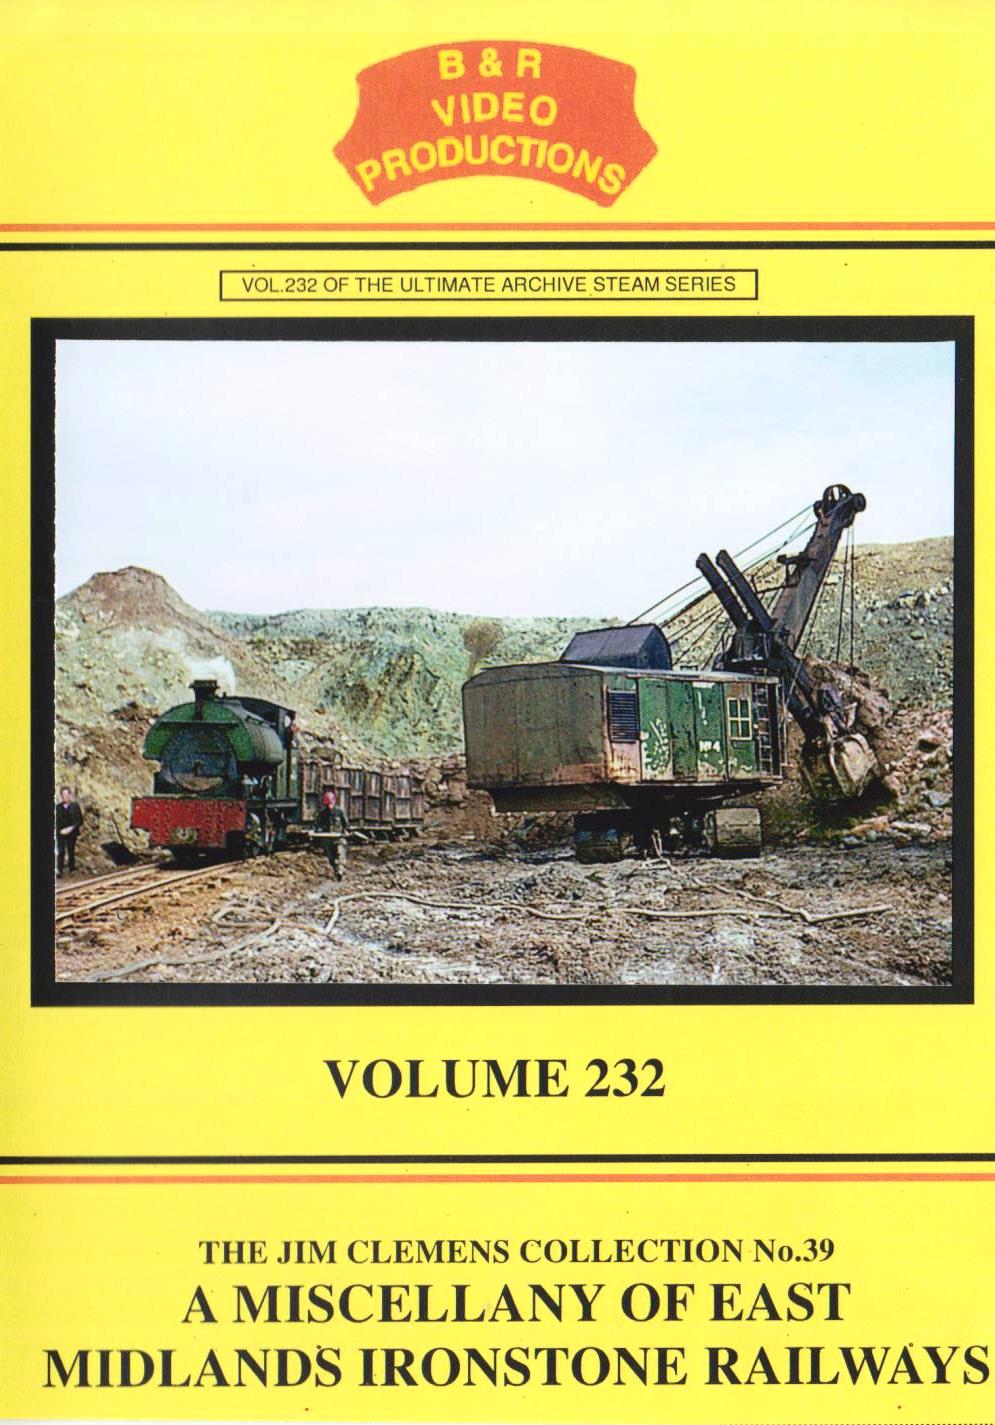 B & R Video Productions Vol 232 - The Jim Clemens collection No.39 A miscellany of east midlands ironstone railways 